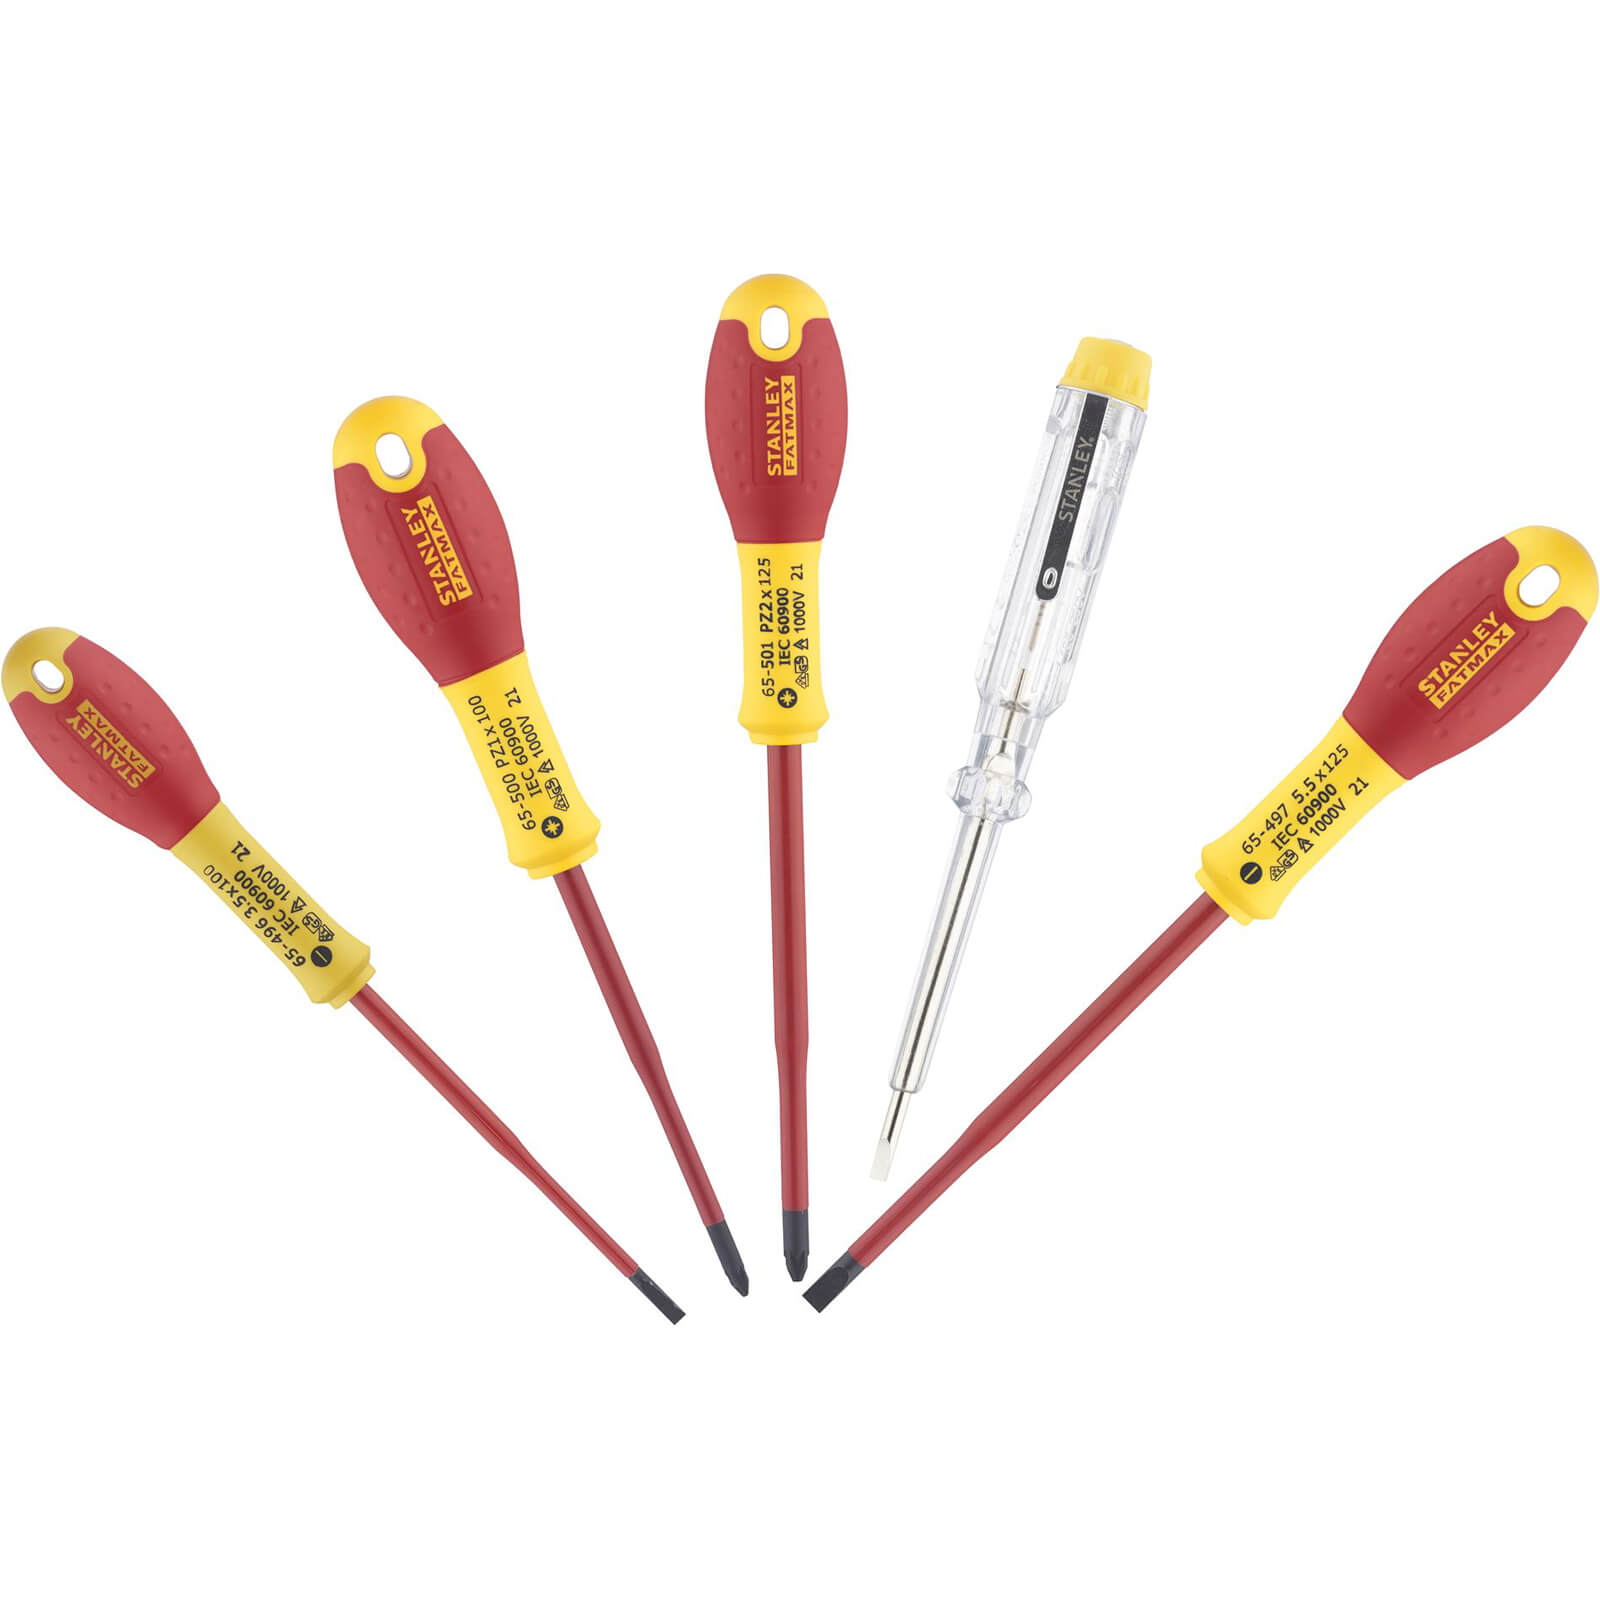 Image of Stanley 5 Piece Fatmax VDE Insulated Pozi and Slotted Screwdriver Set